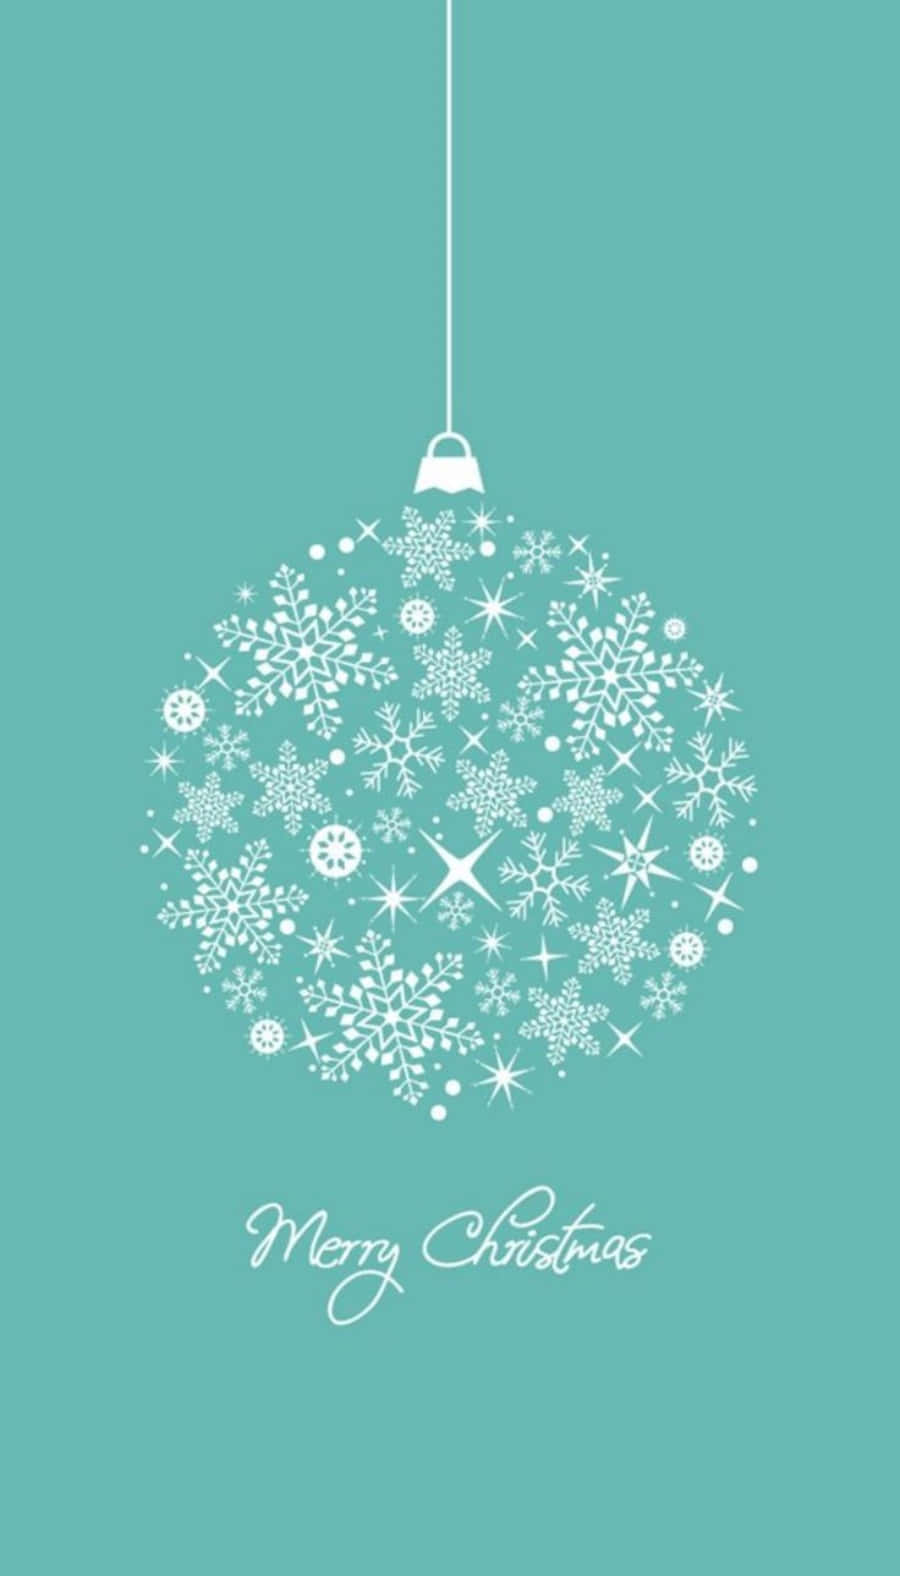 A Christmas Ball With Snowflakes On A Turquoise Background Wallpaper